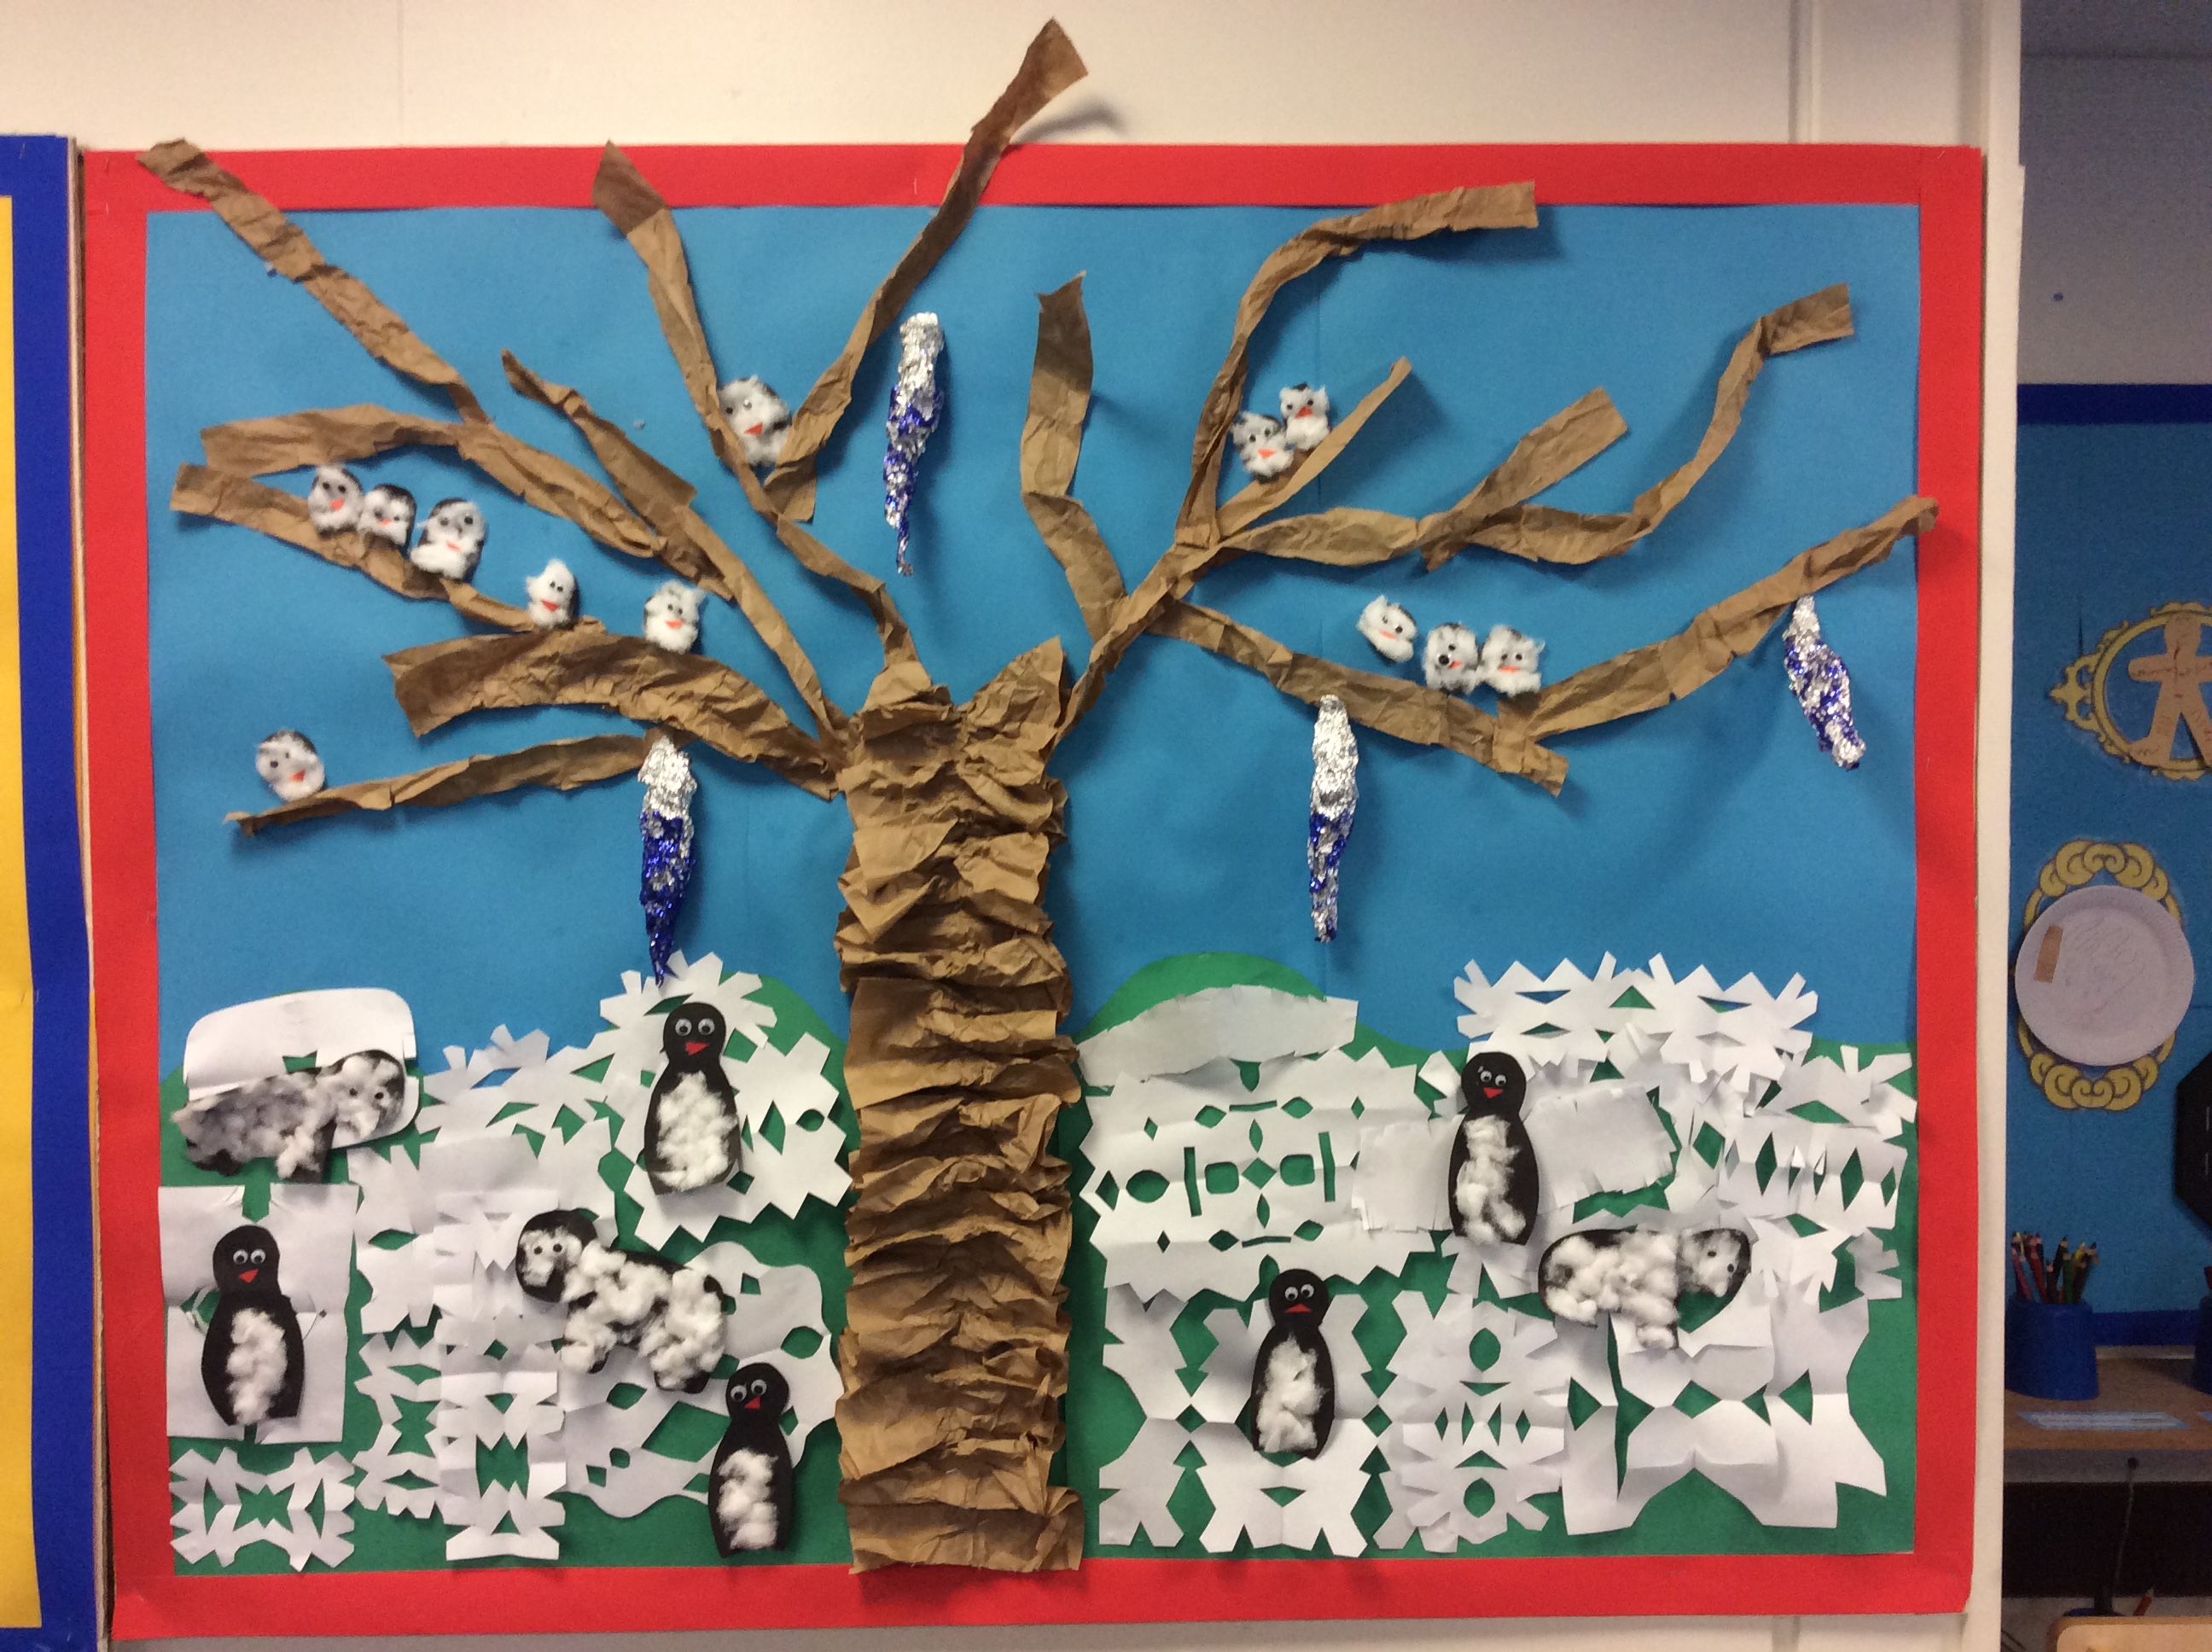 Seasons are changing – Brinsworth Whitehill Primary School